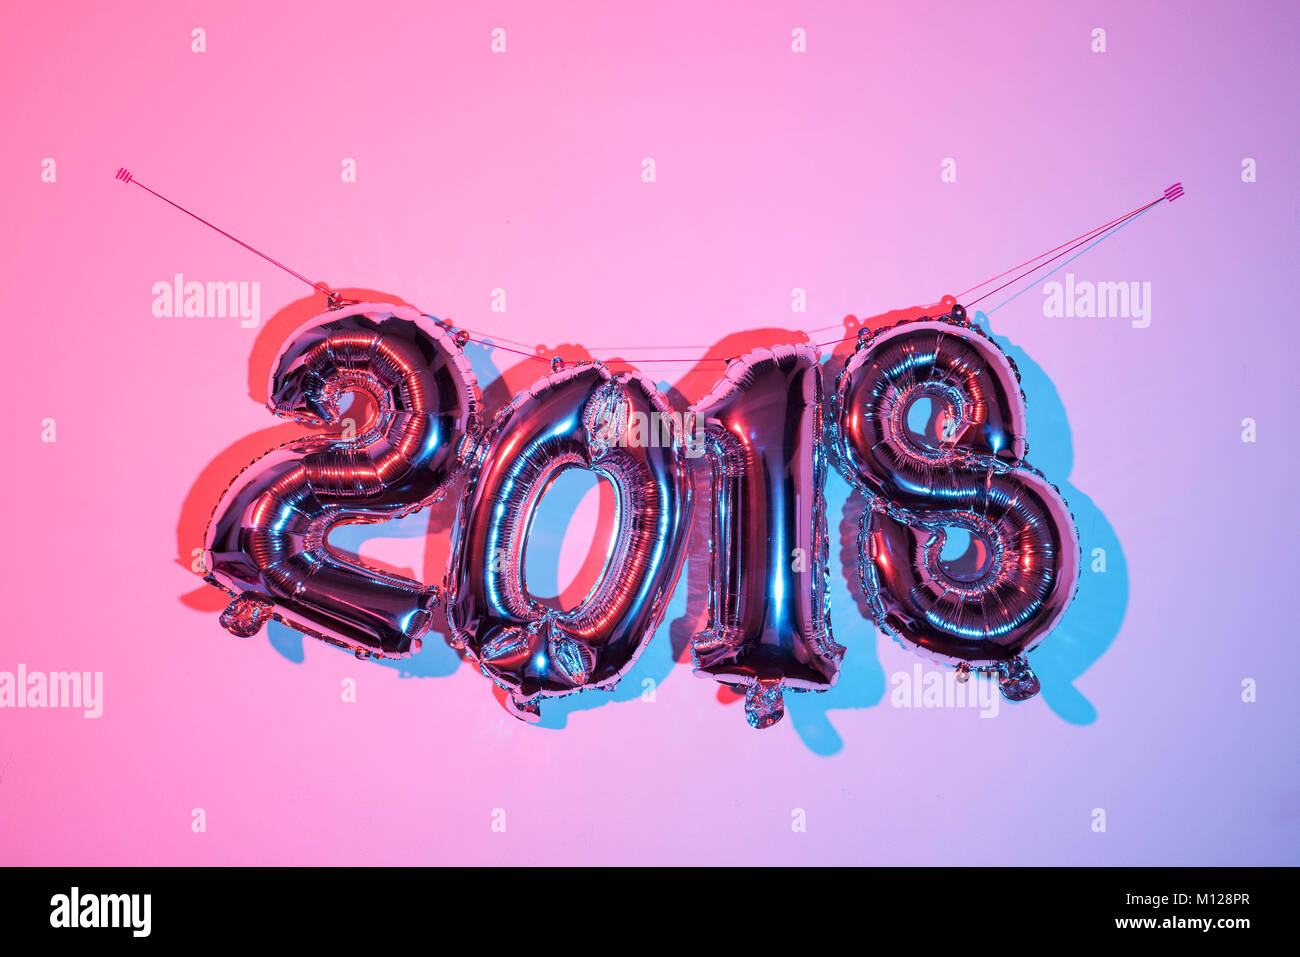 some fuchsia number-shaped balloons forming the number 2018, as the new year, hanging on a pink wall, with a stroboscopic effect Stock Photo